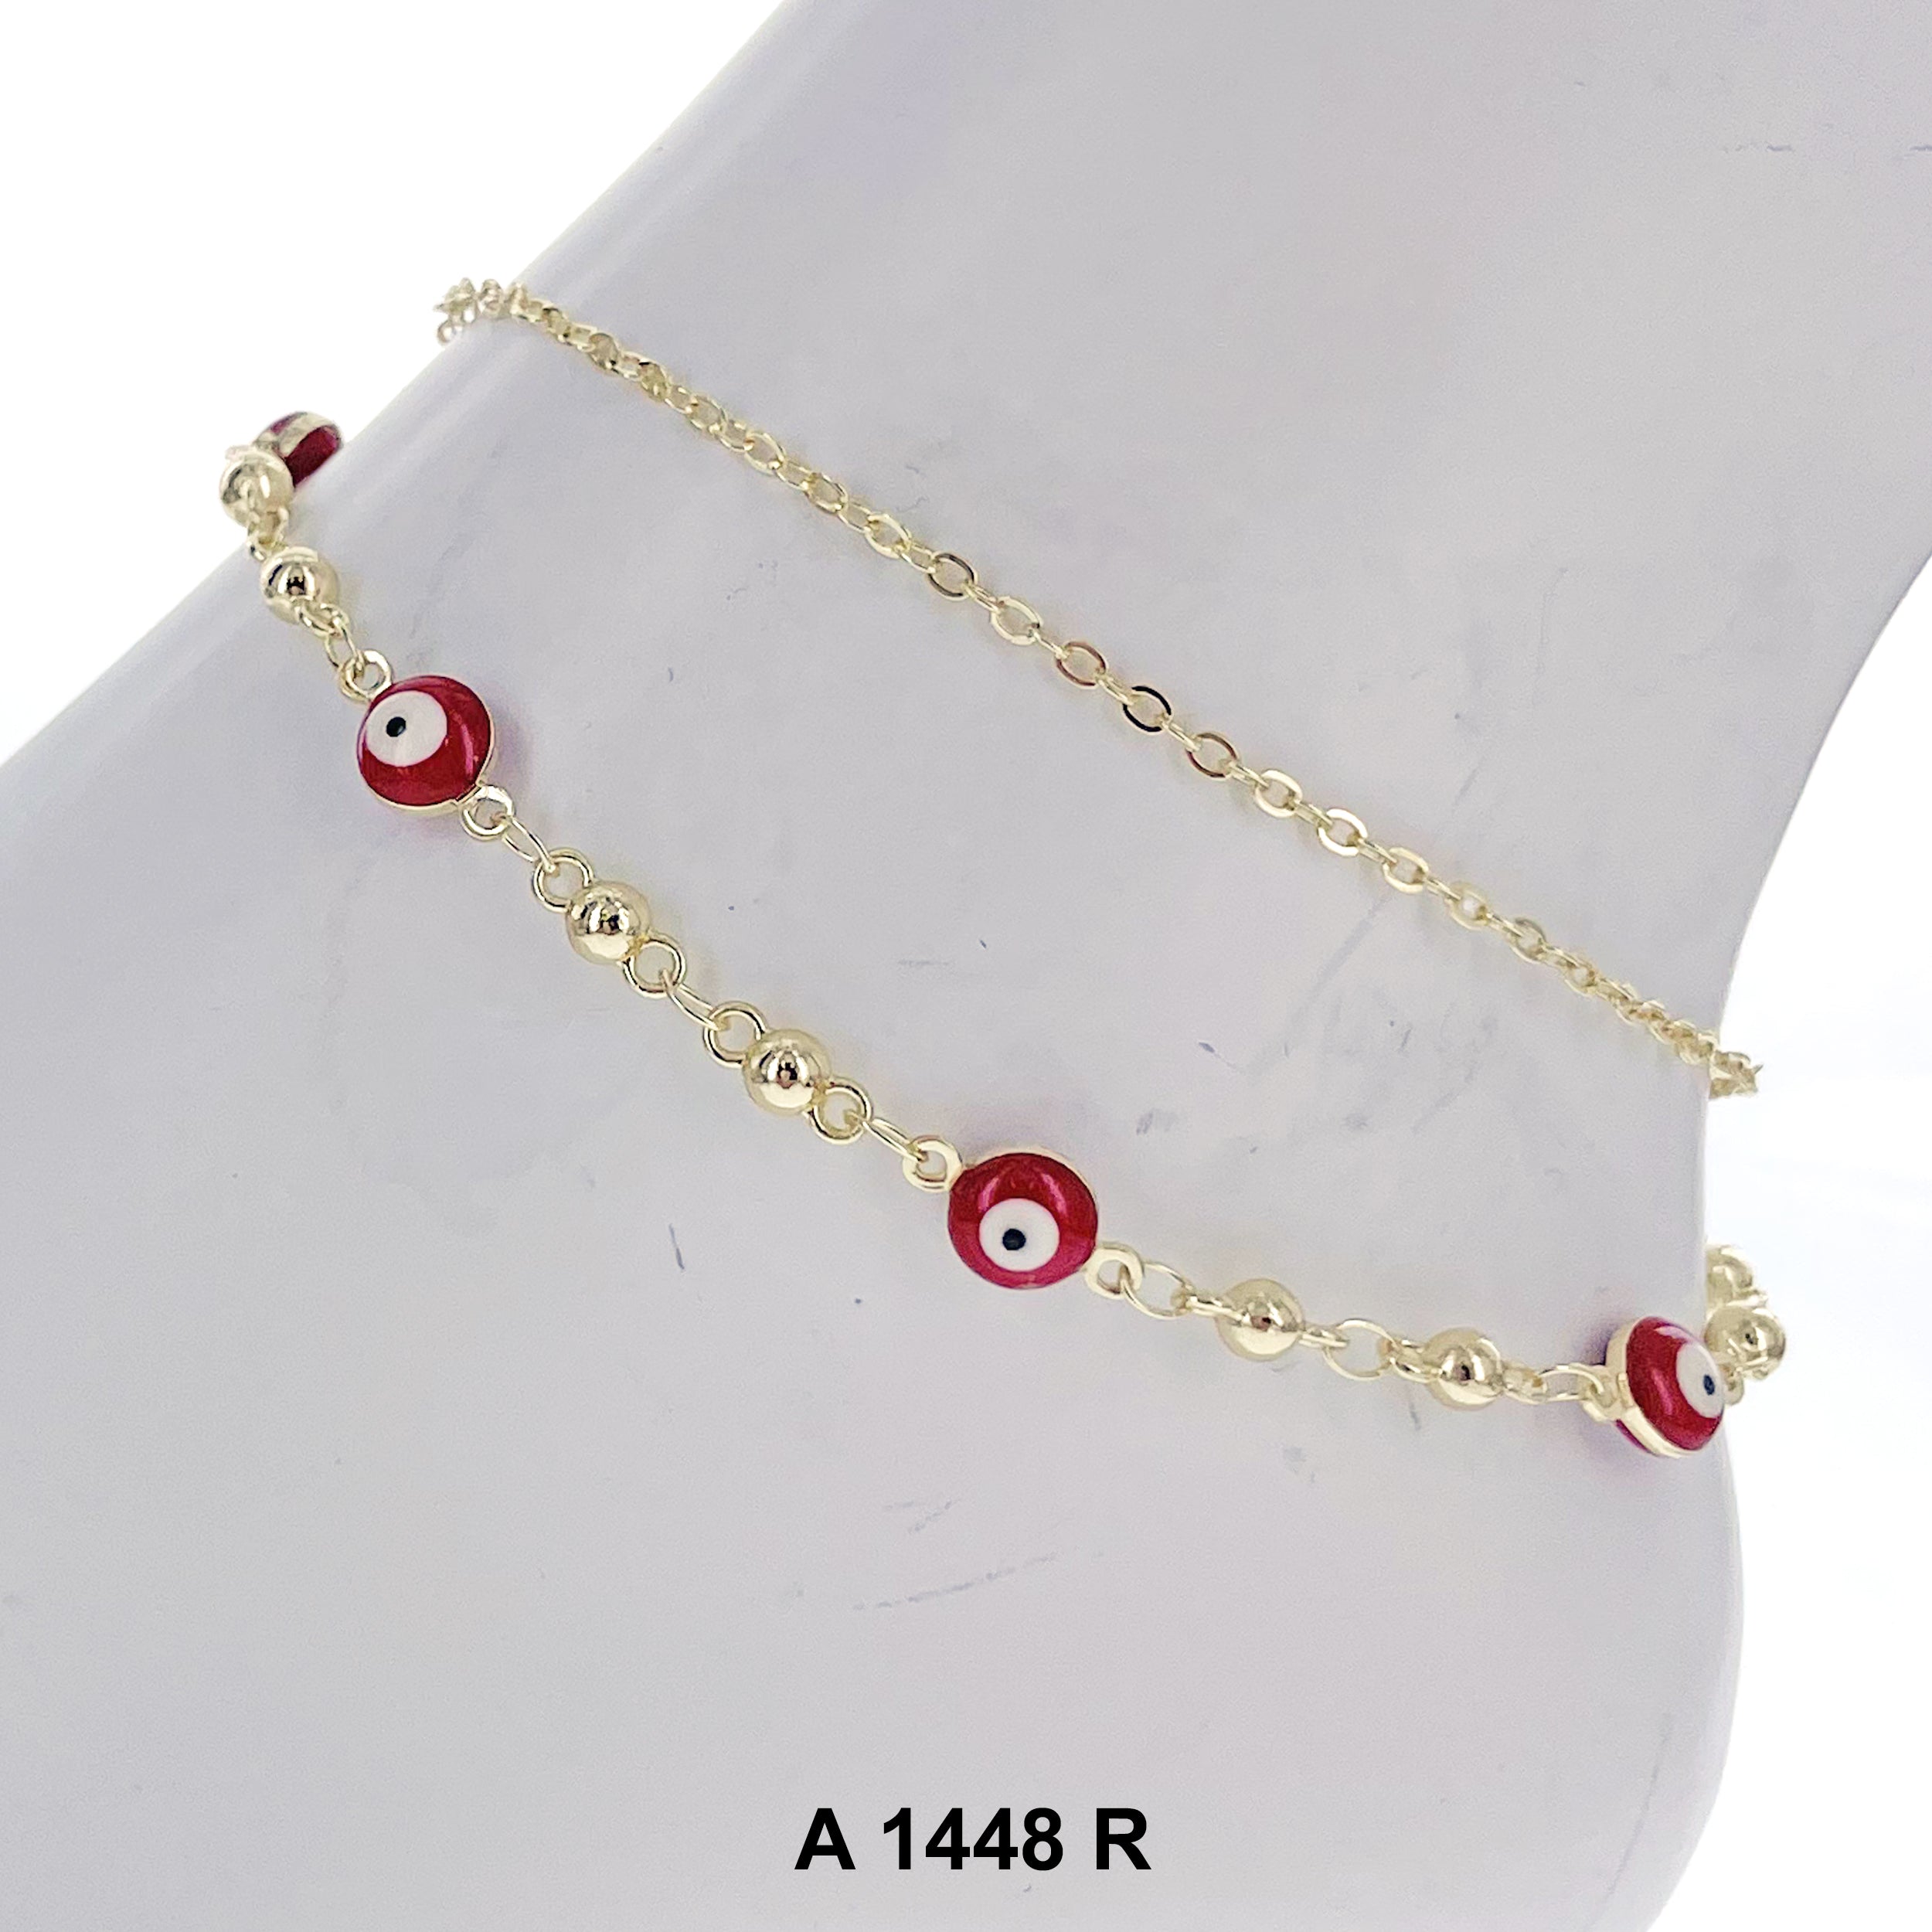 Fashion Anklets A 1448 R